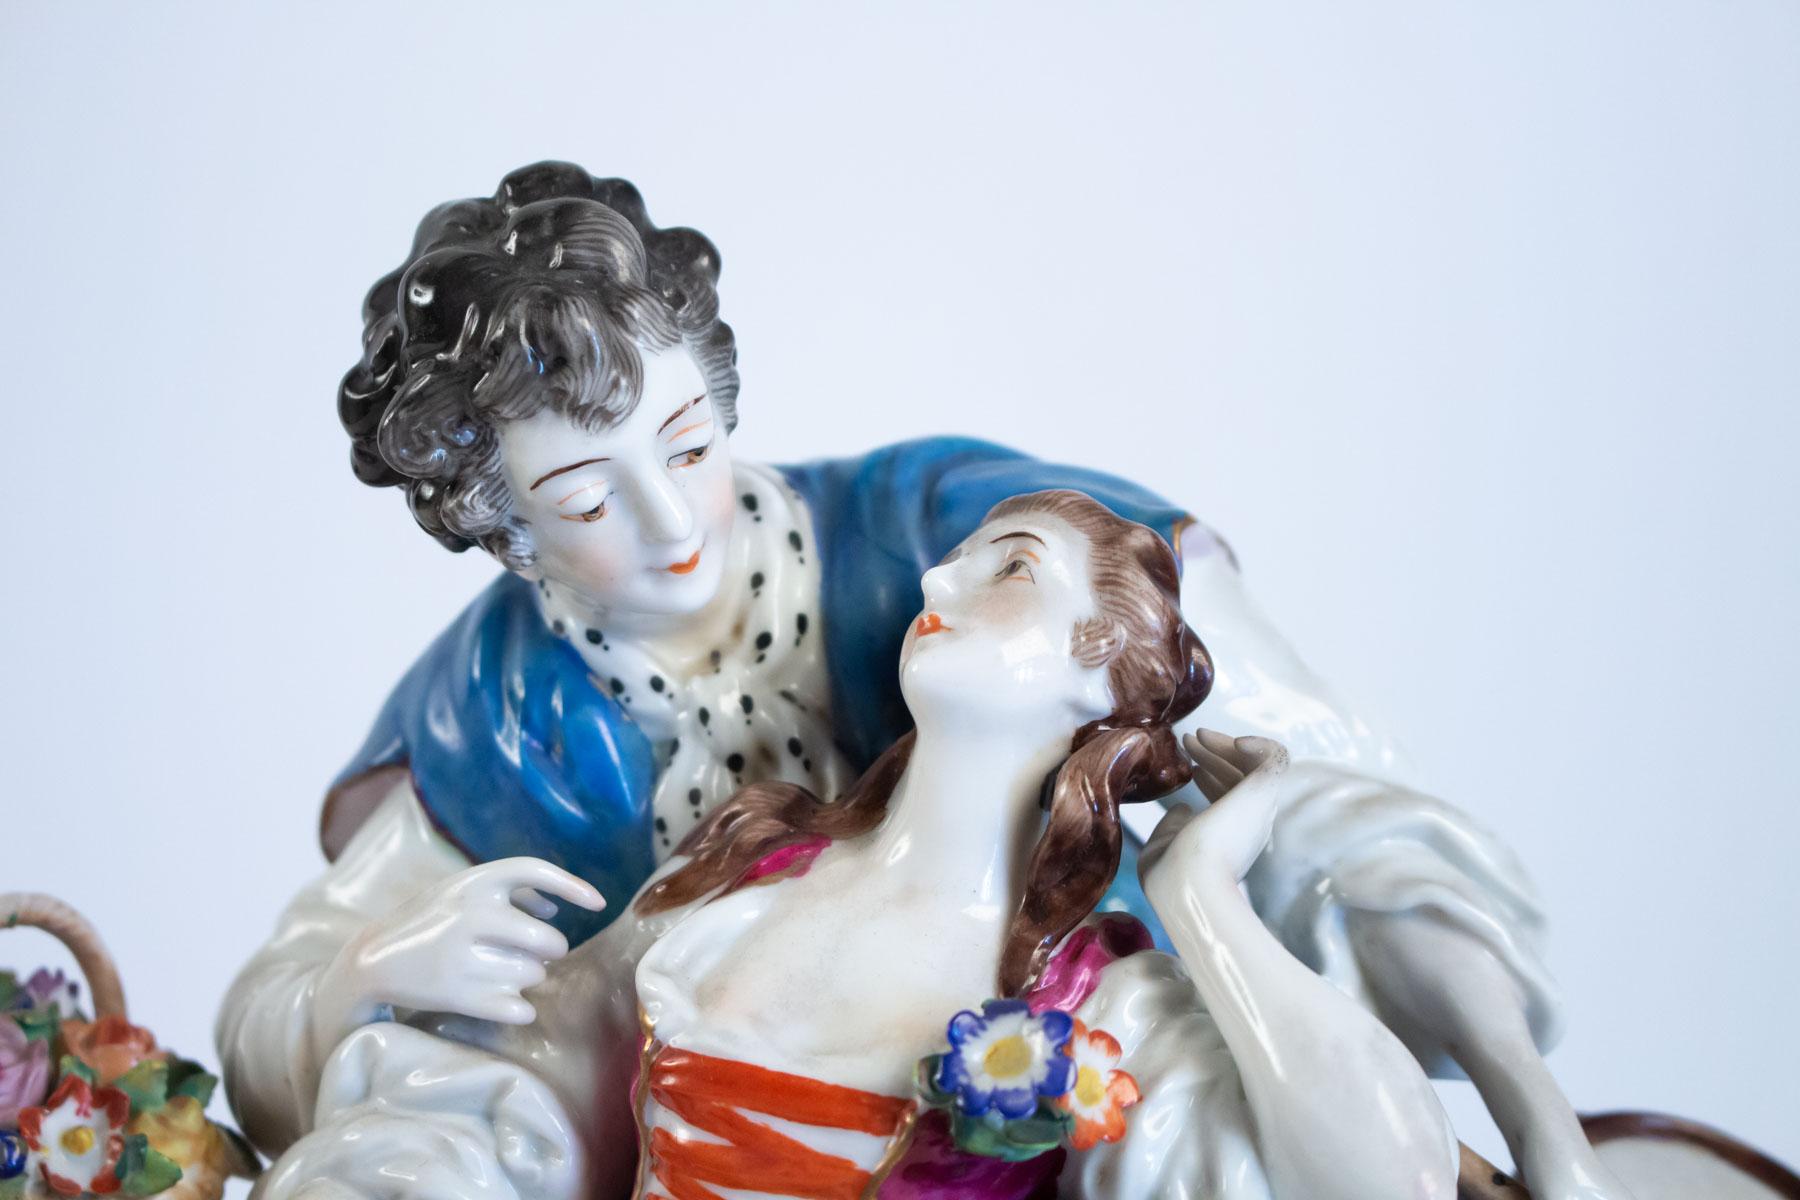 Porcelain group representative an elegant with her courtesan, earthenware in antique style, early 20th century, signature.
Measures: H 25cm, W 23cm, D 16cm.